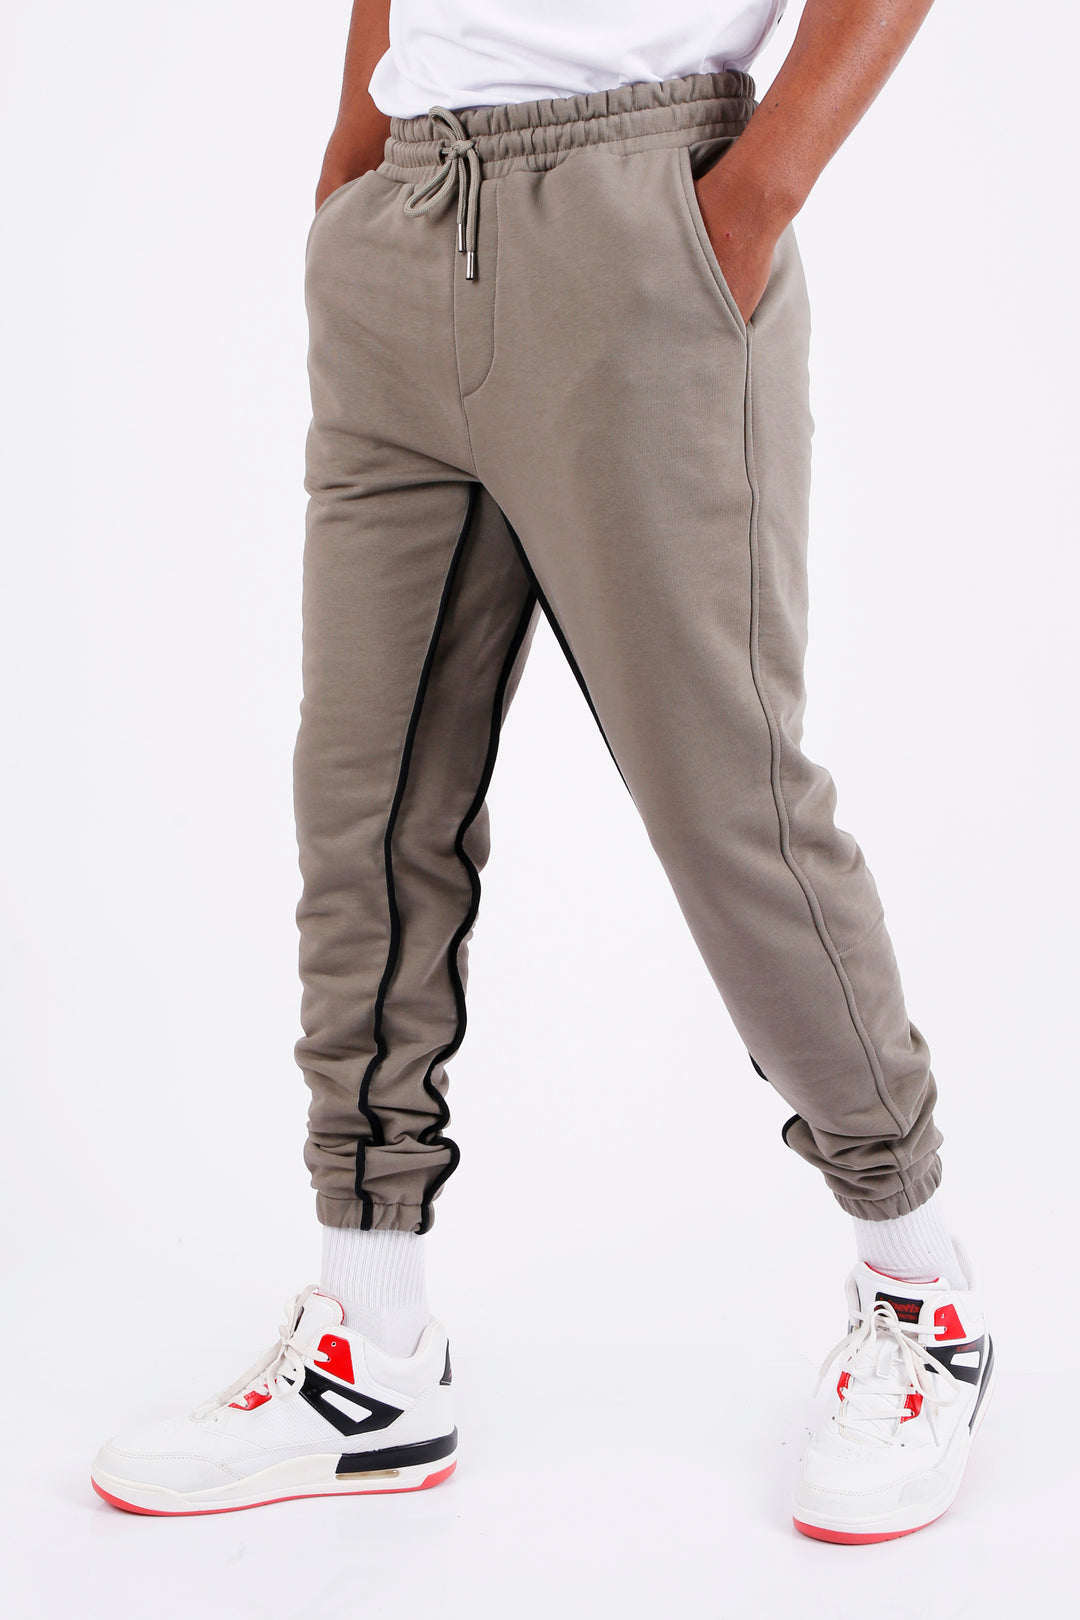 Men's tracksuit with stripes, elastic cuff